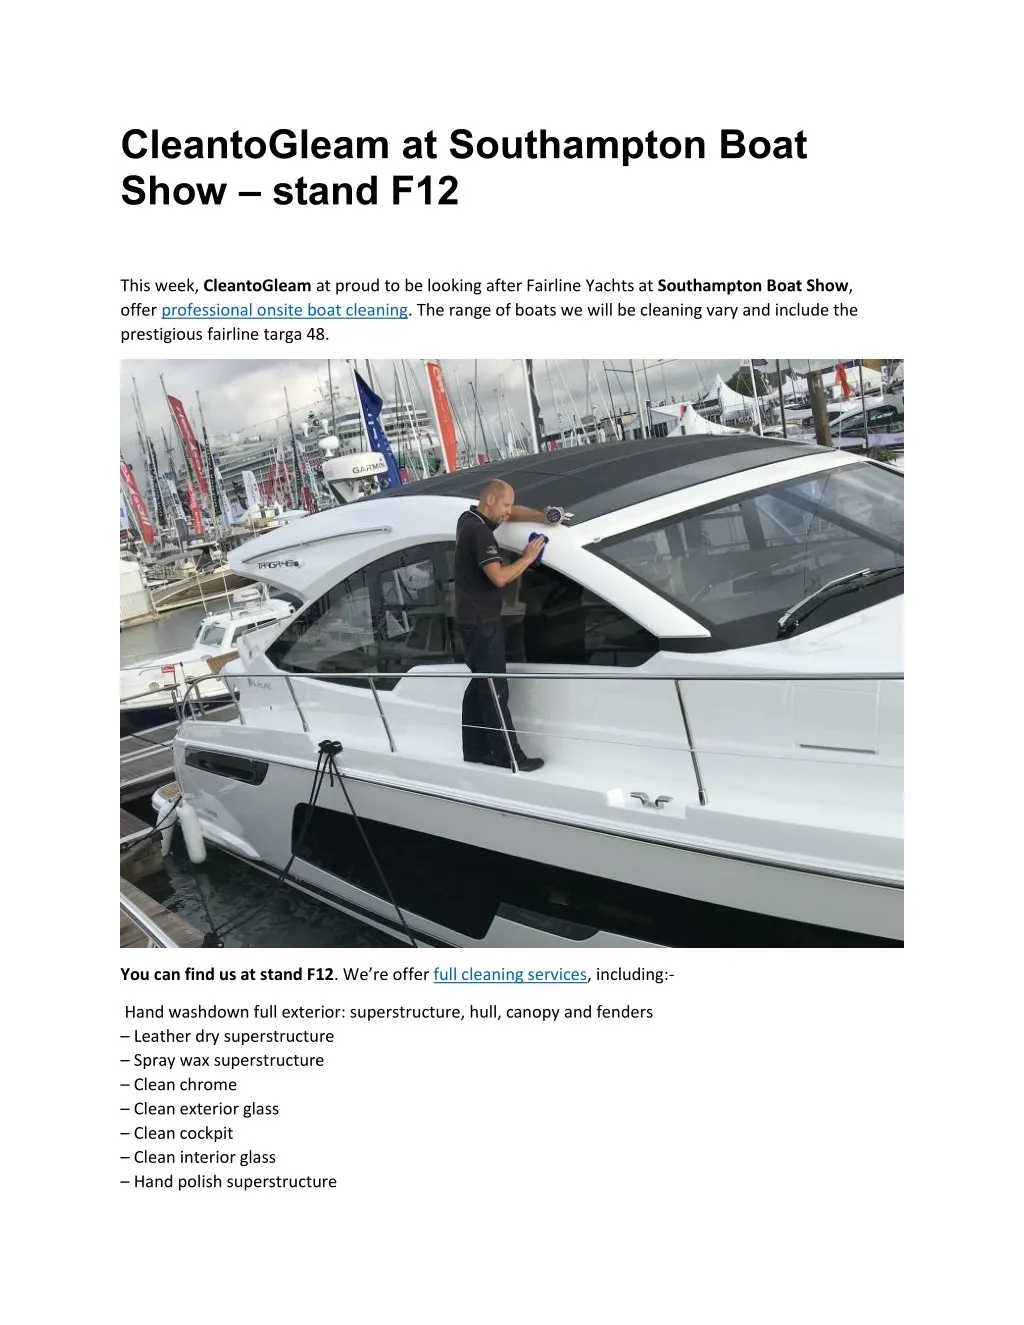 cleantogleam at southampton boat show stand f12